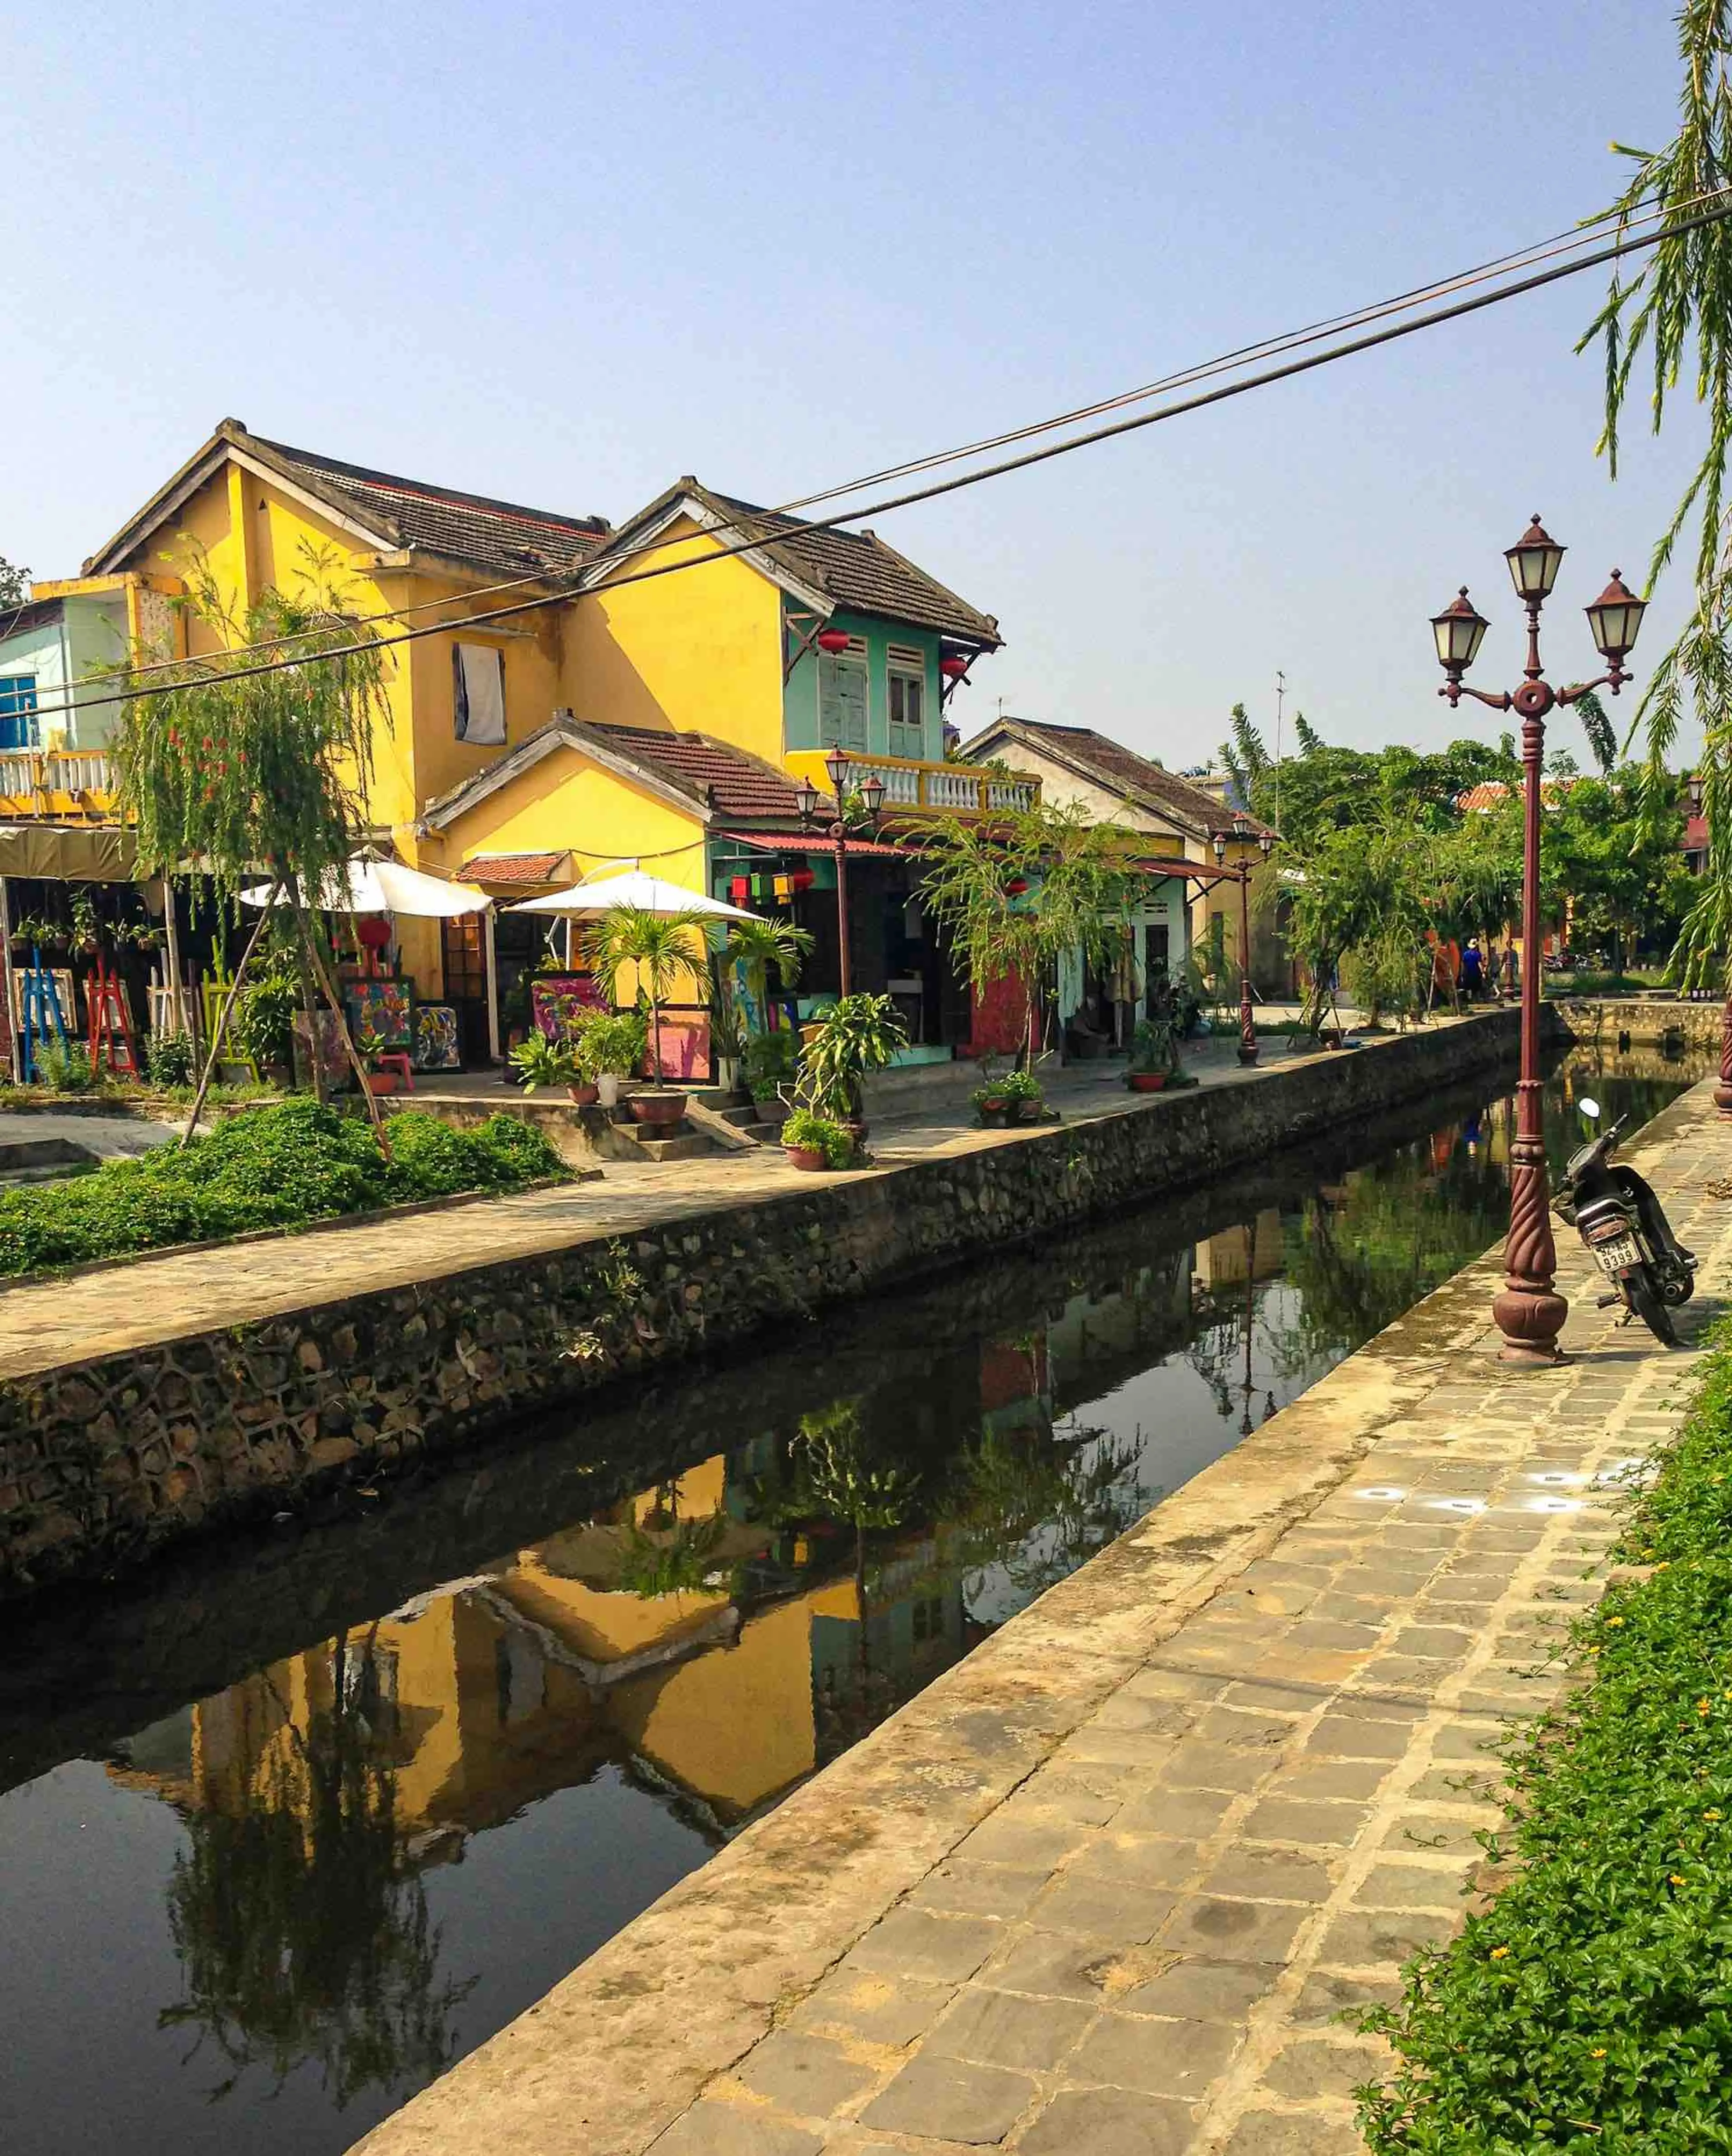 Cycling to the countryside of Hoi An